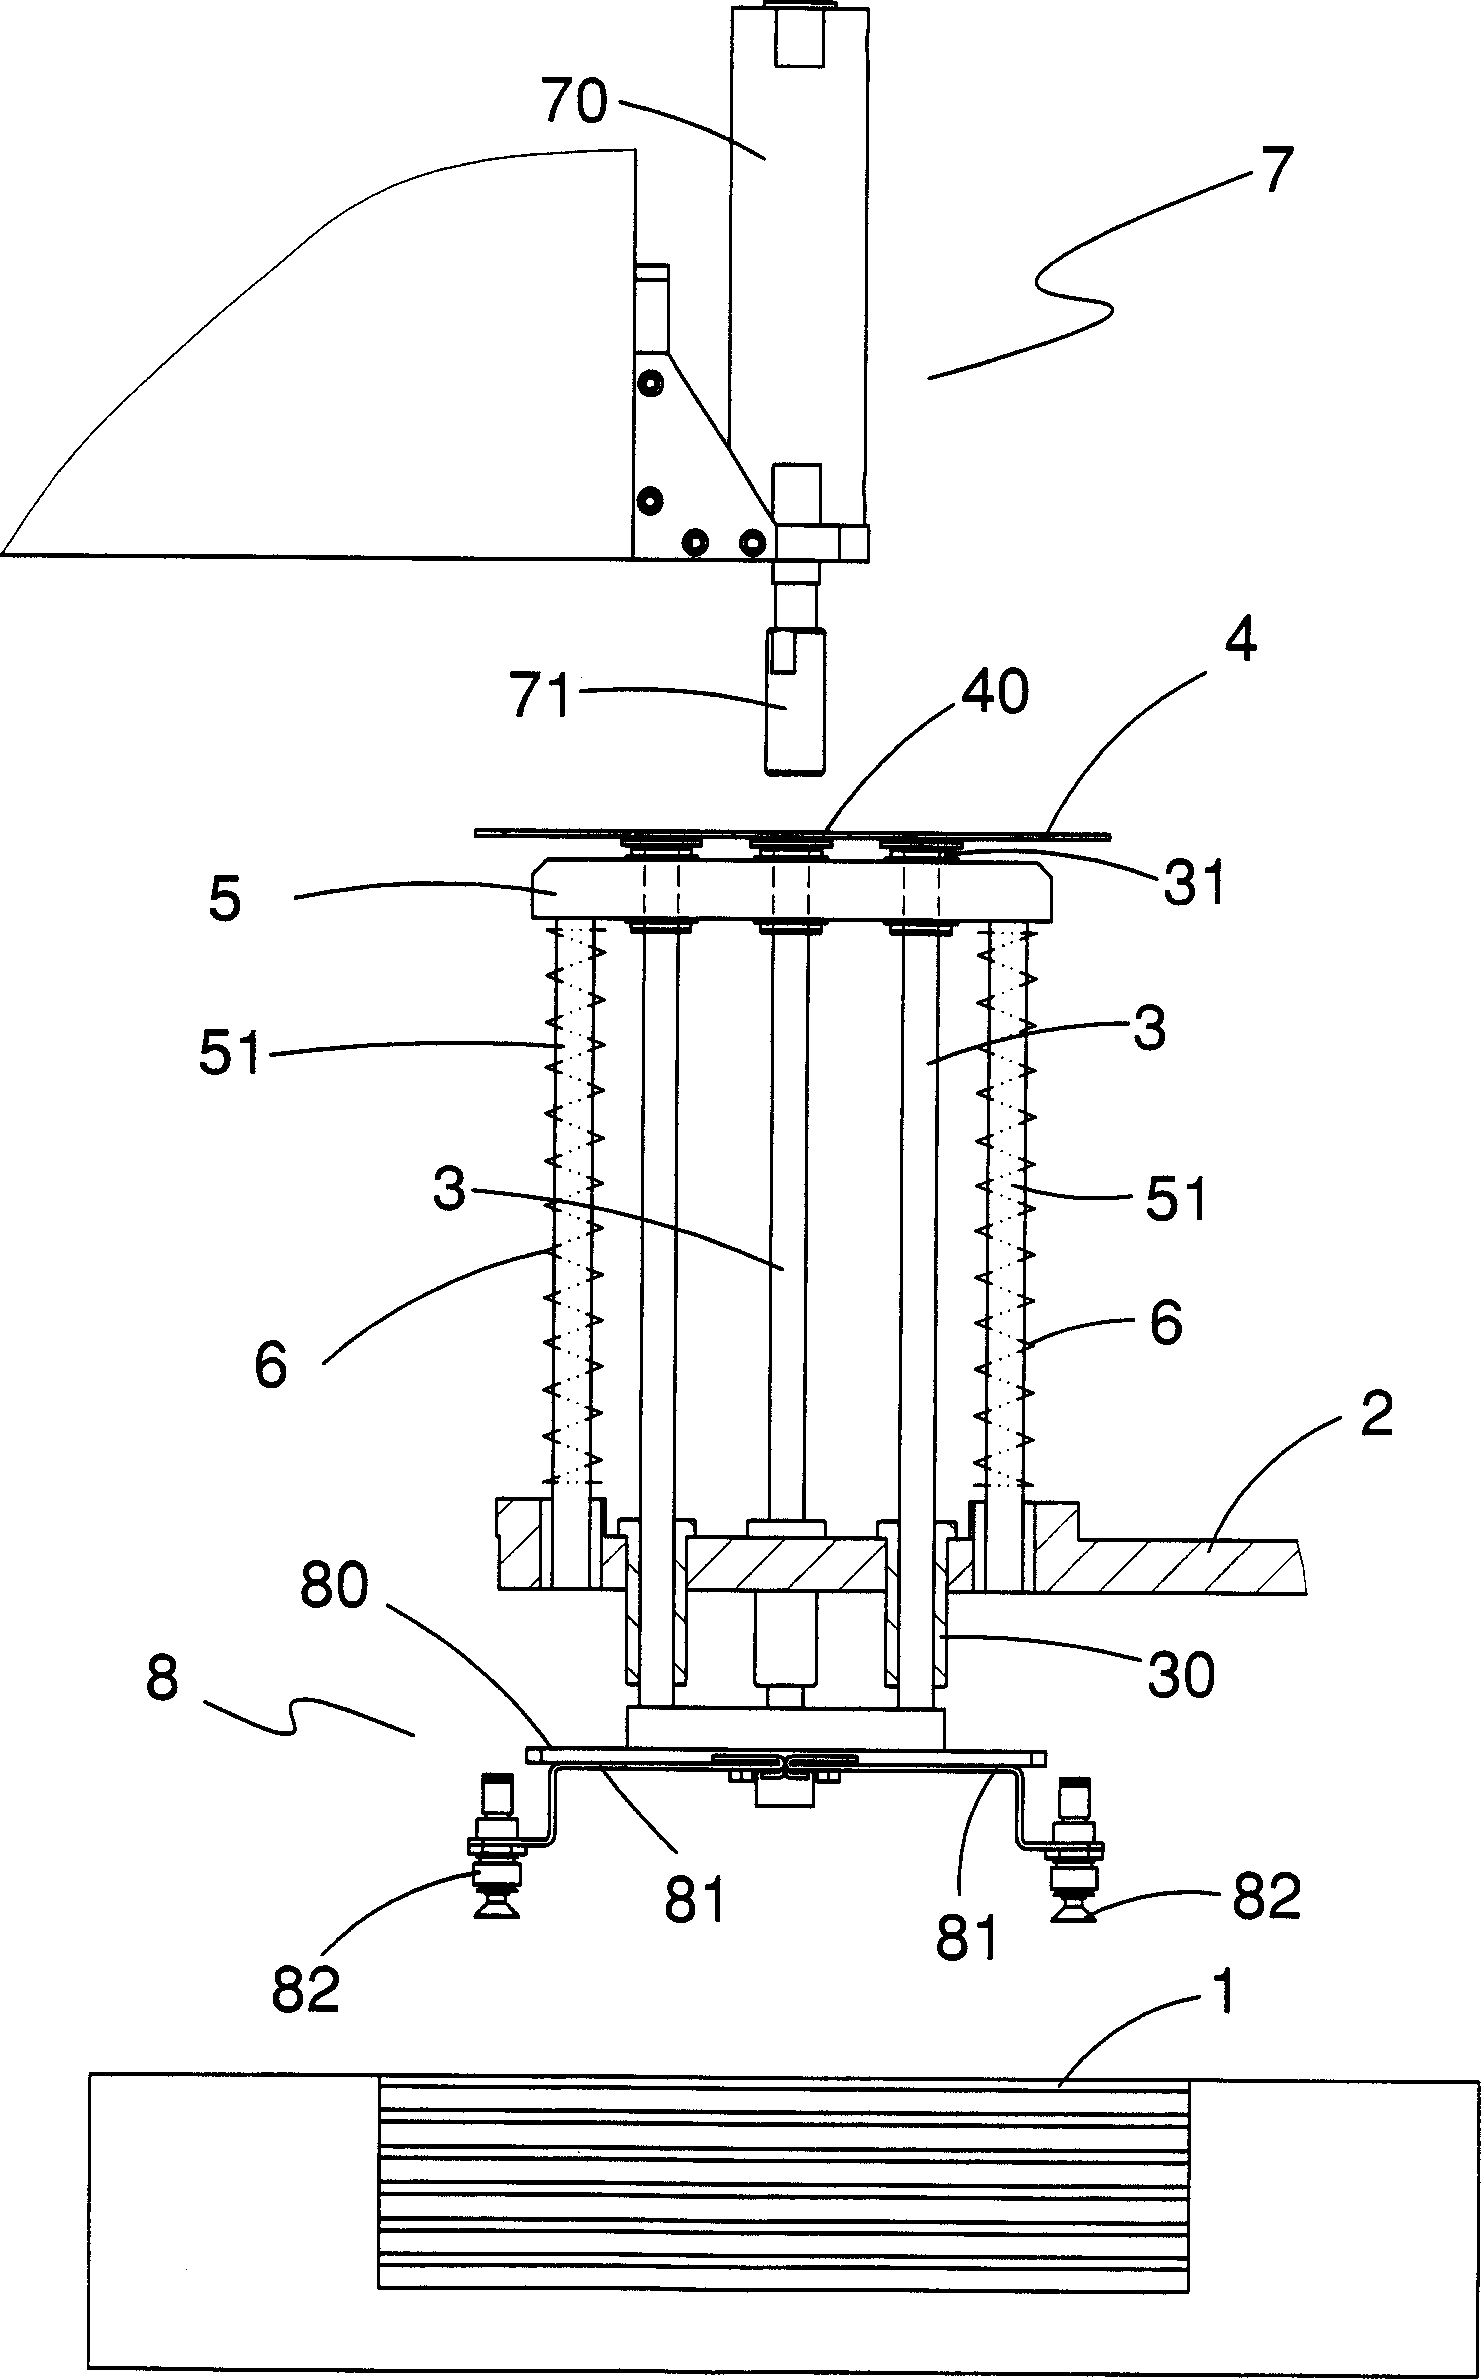 Material taking device